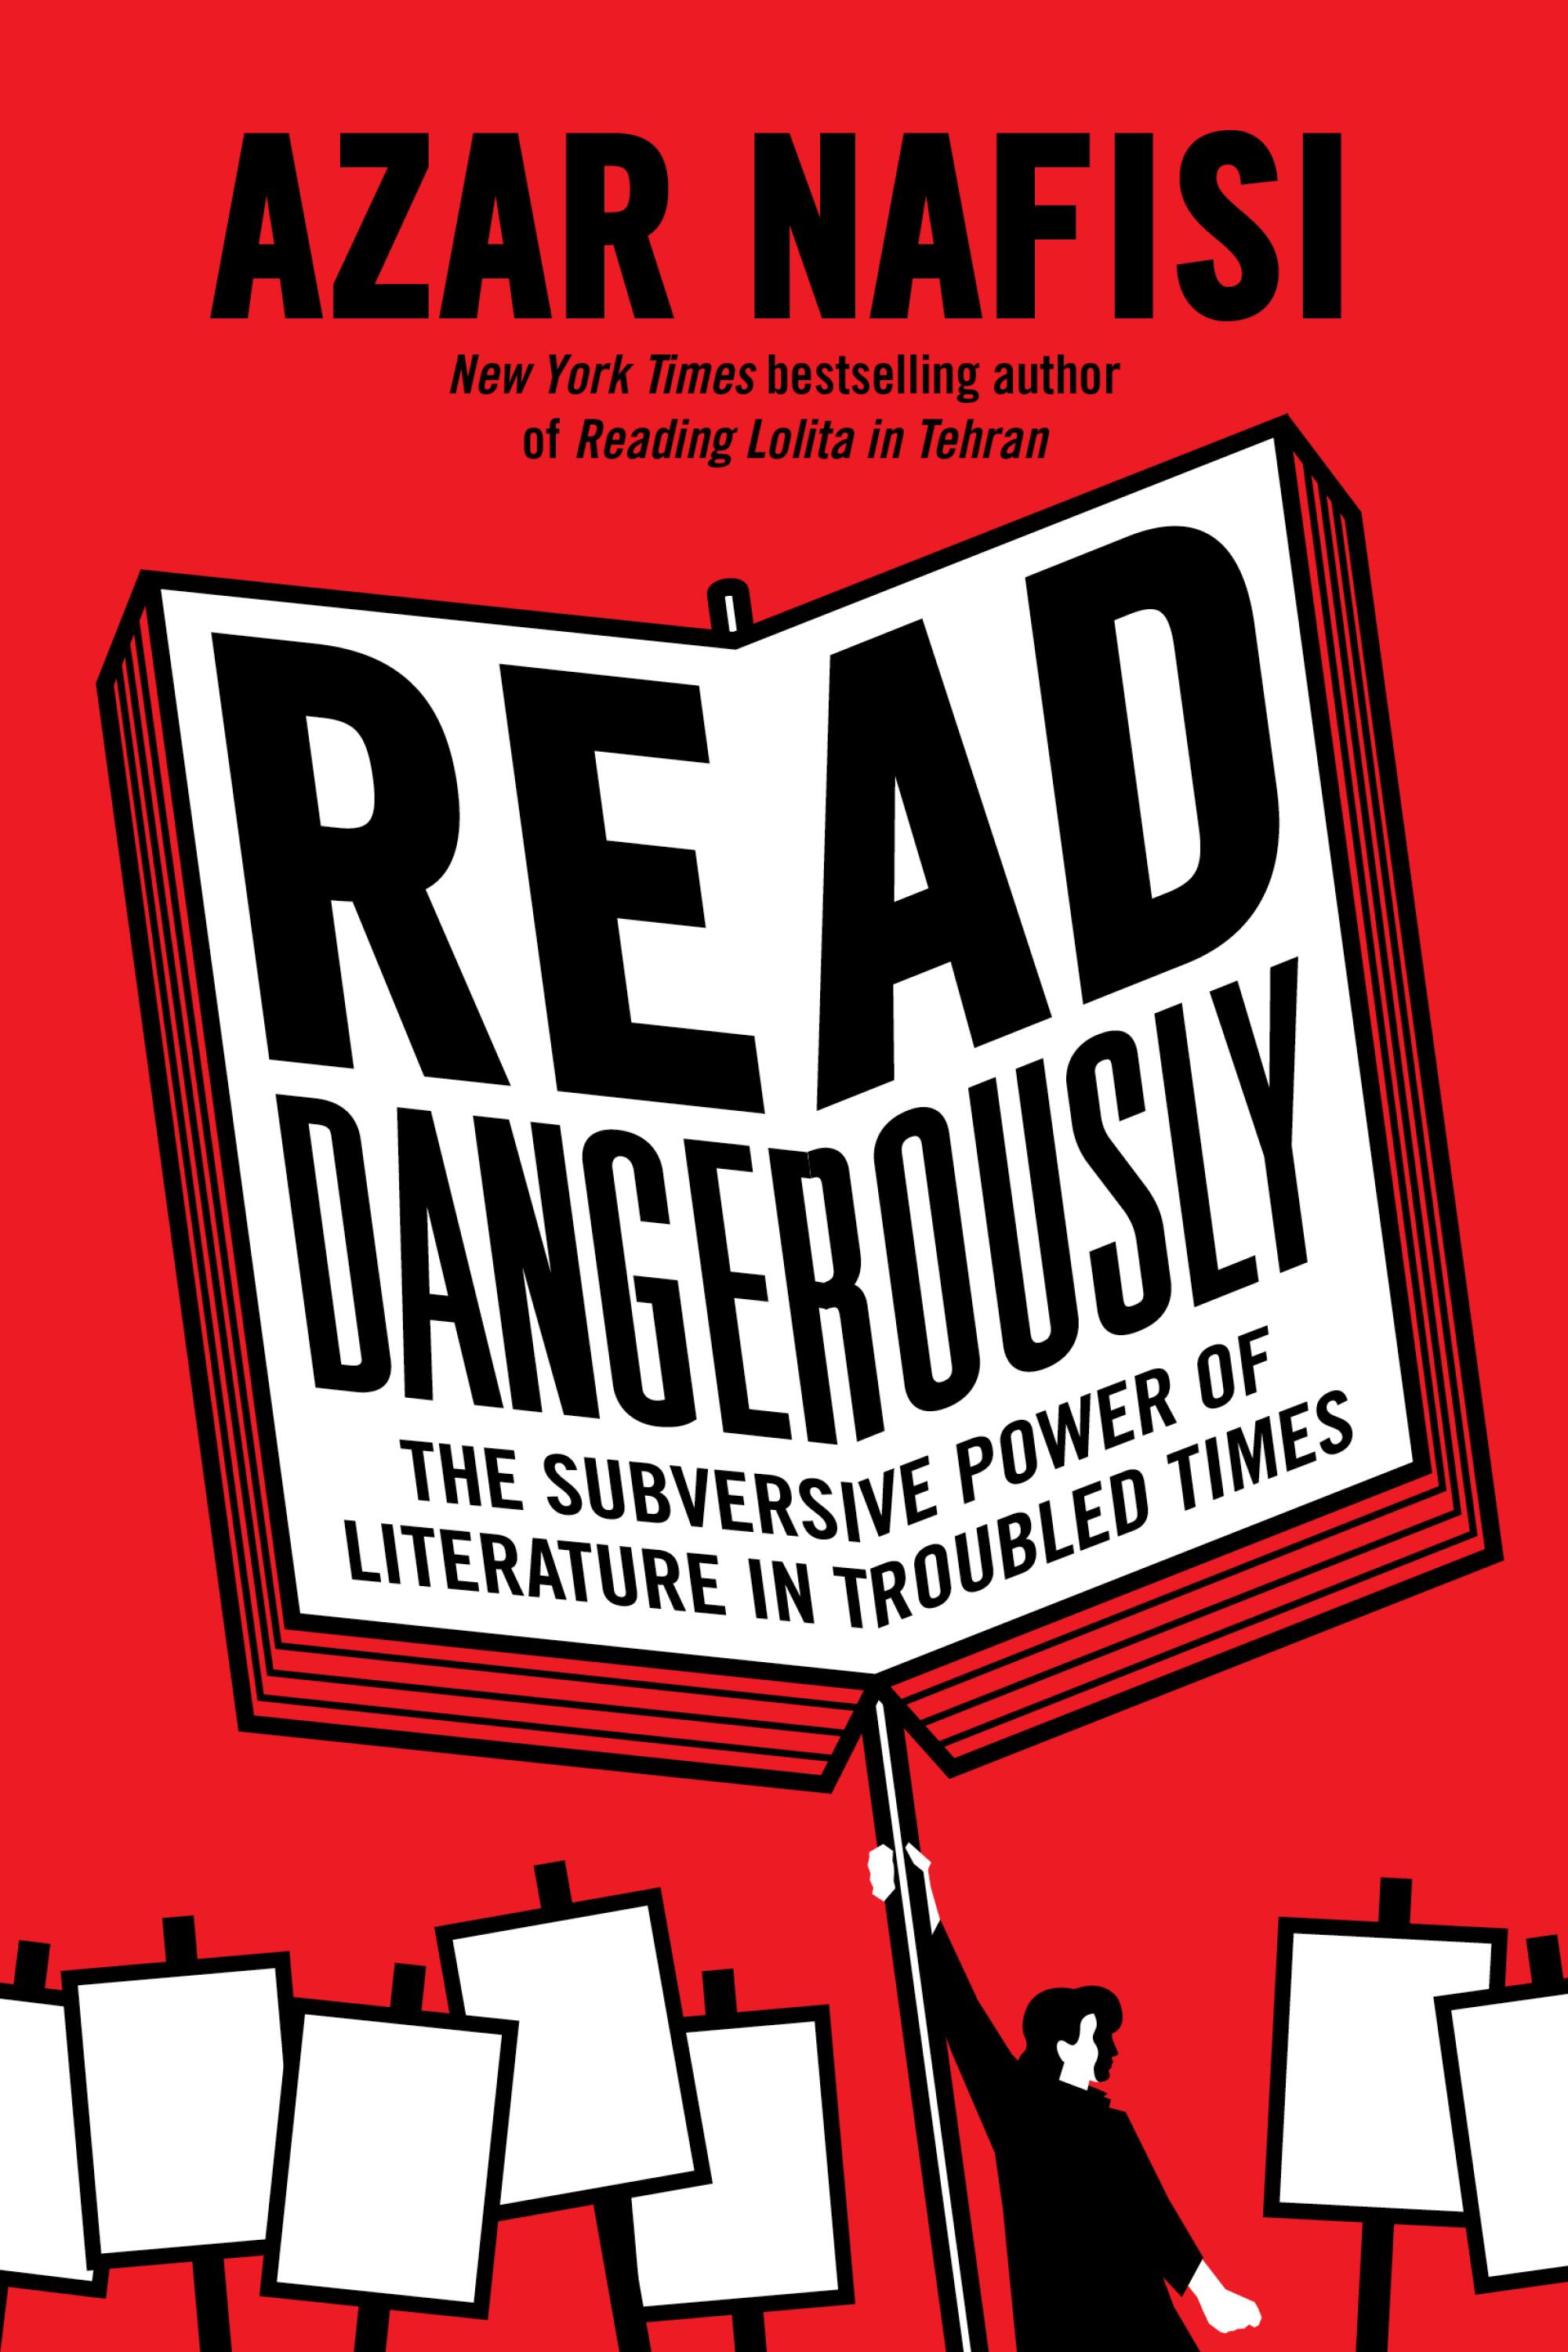 The cover of "Read Dangerously" by Azar Nafisi